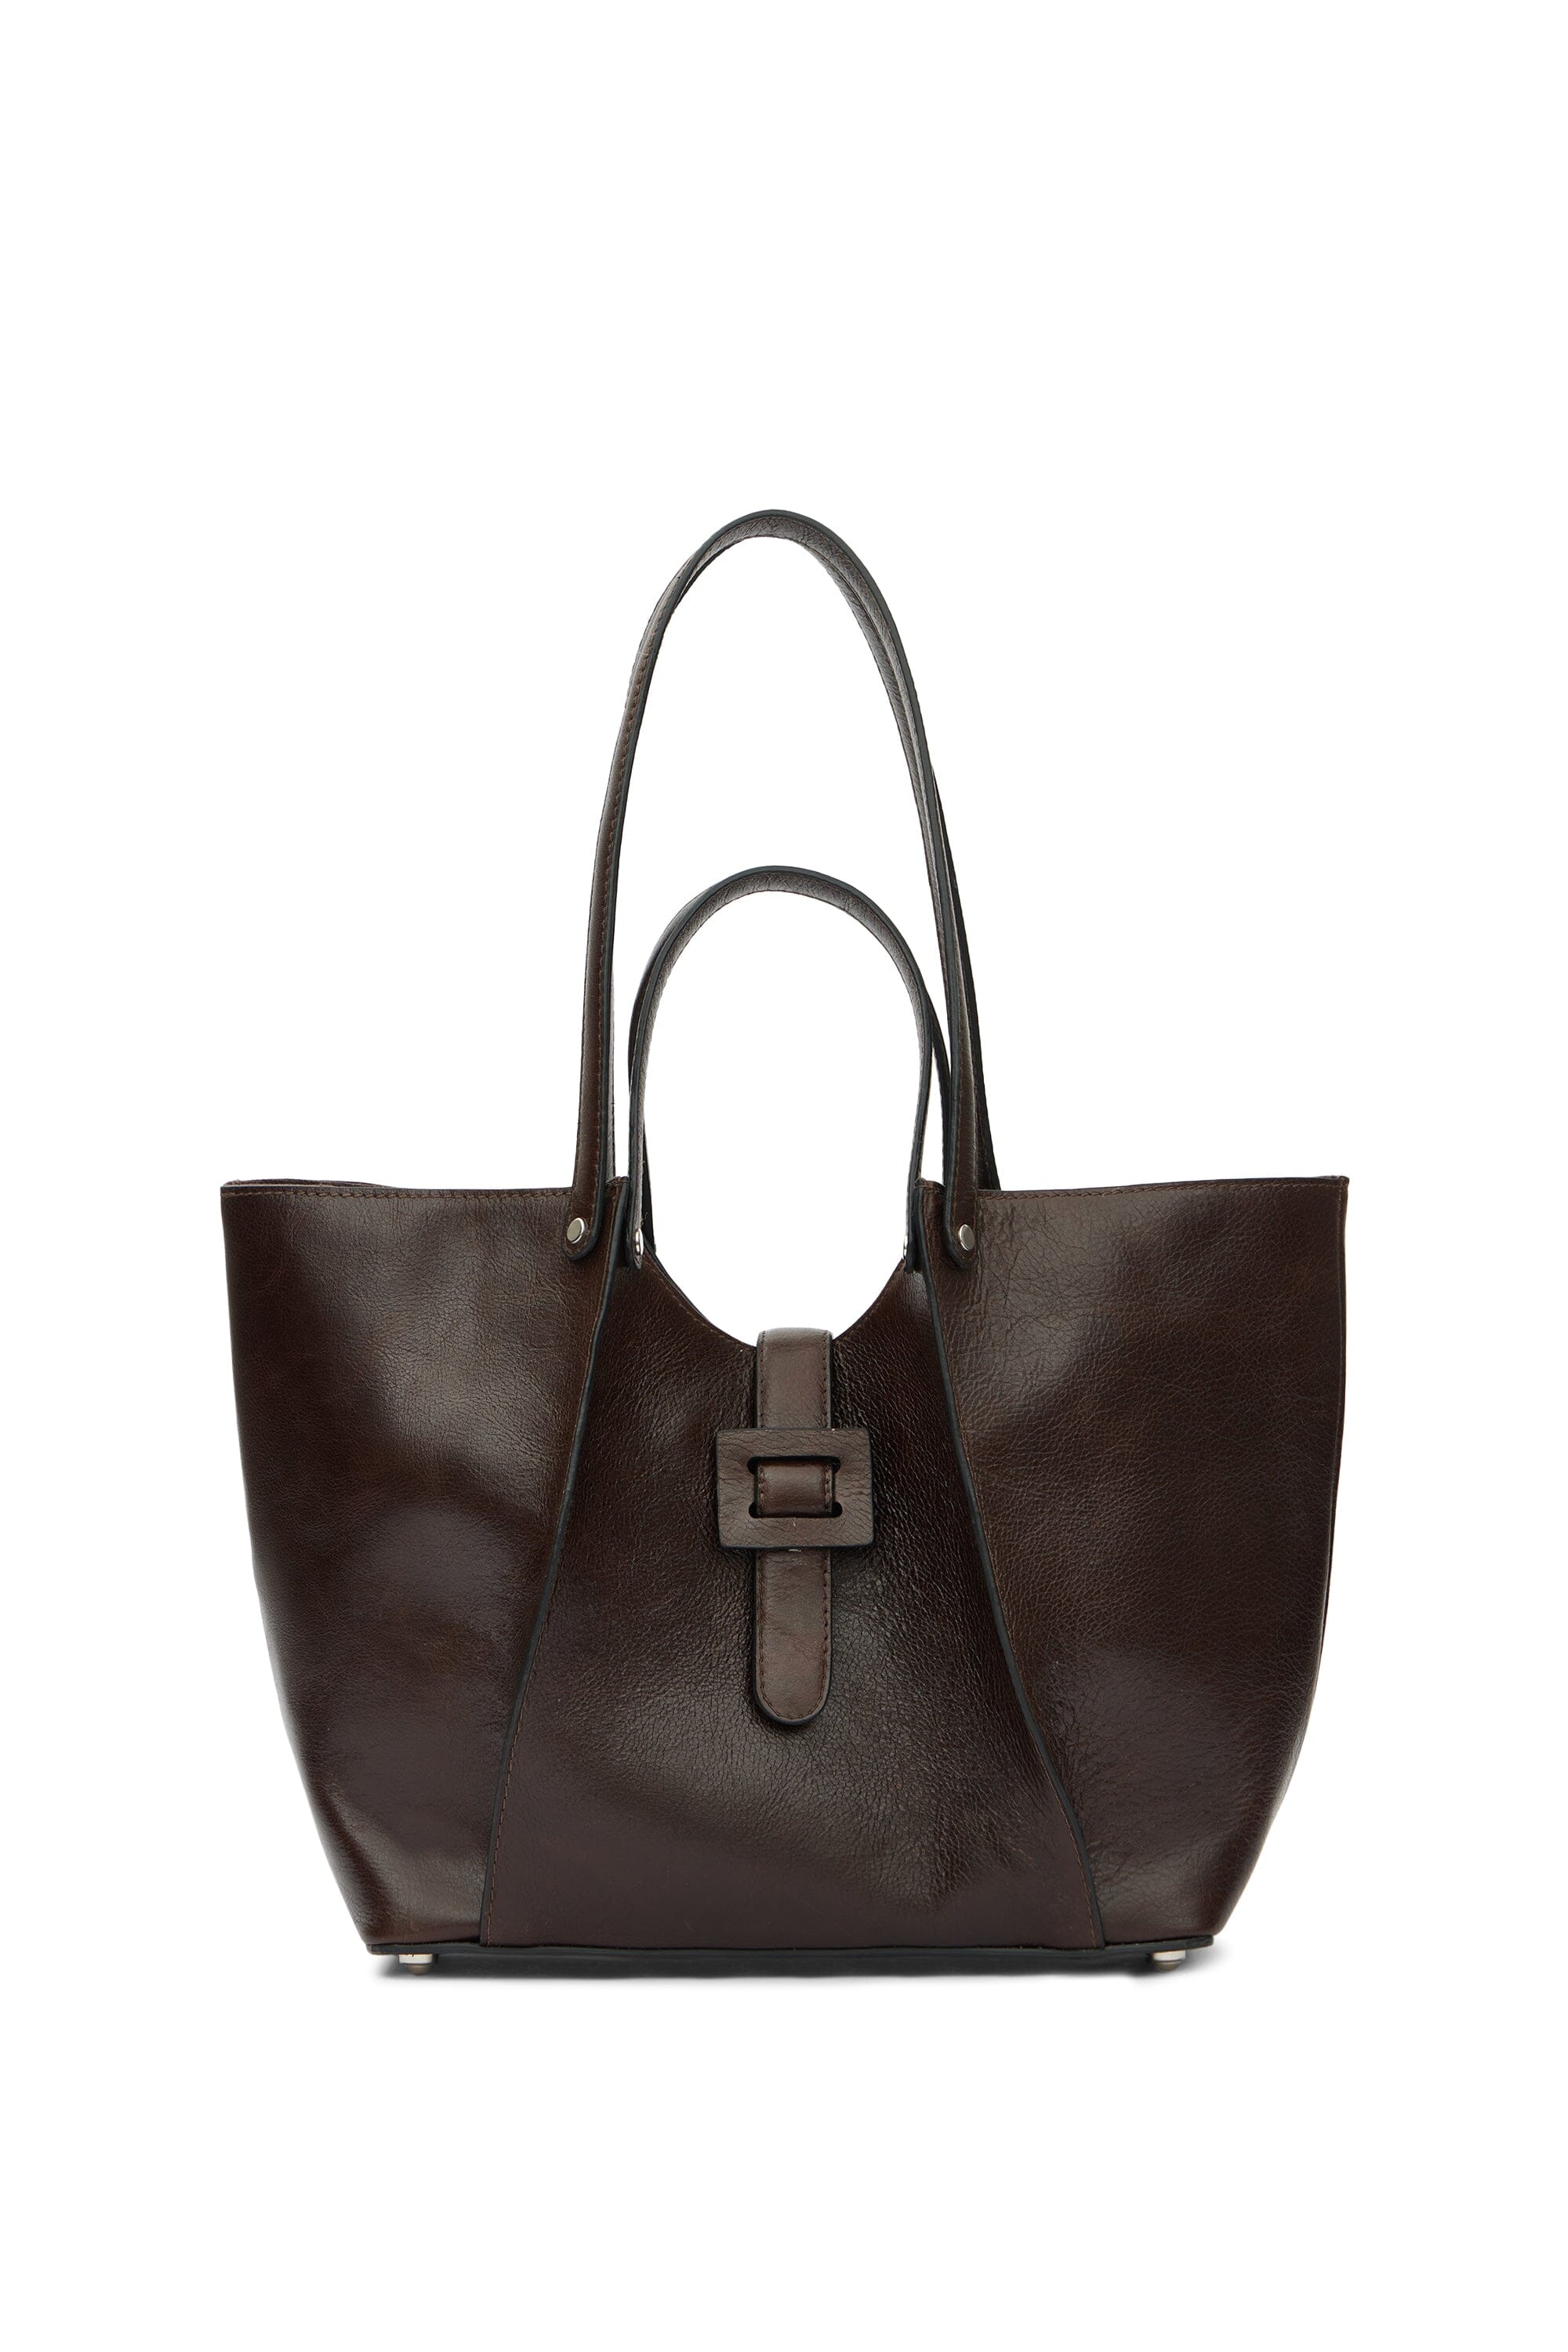 Madison Tote in Deep Brown